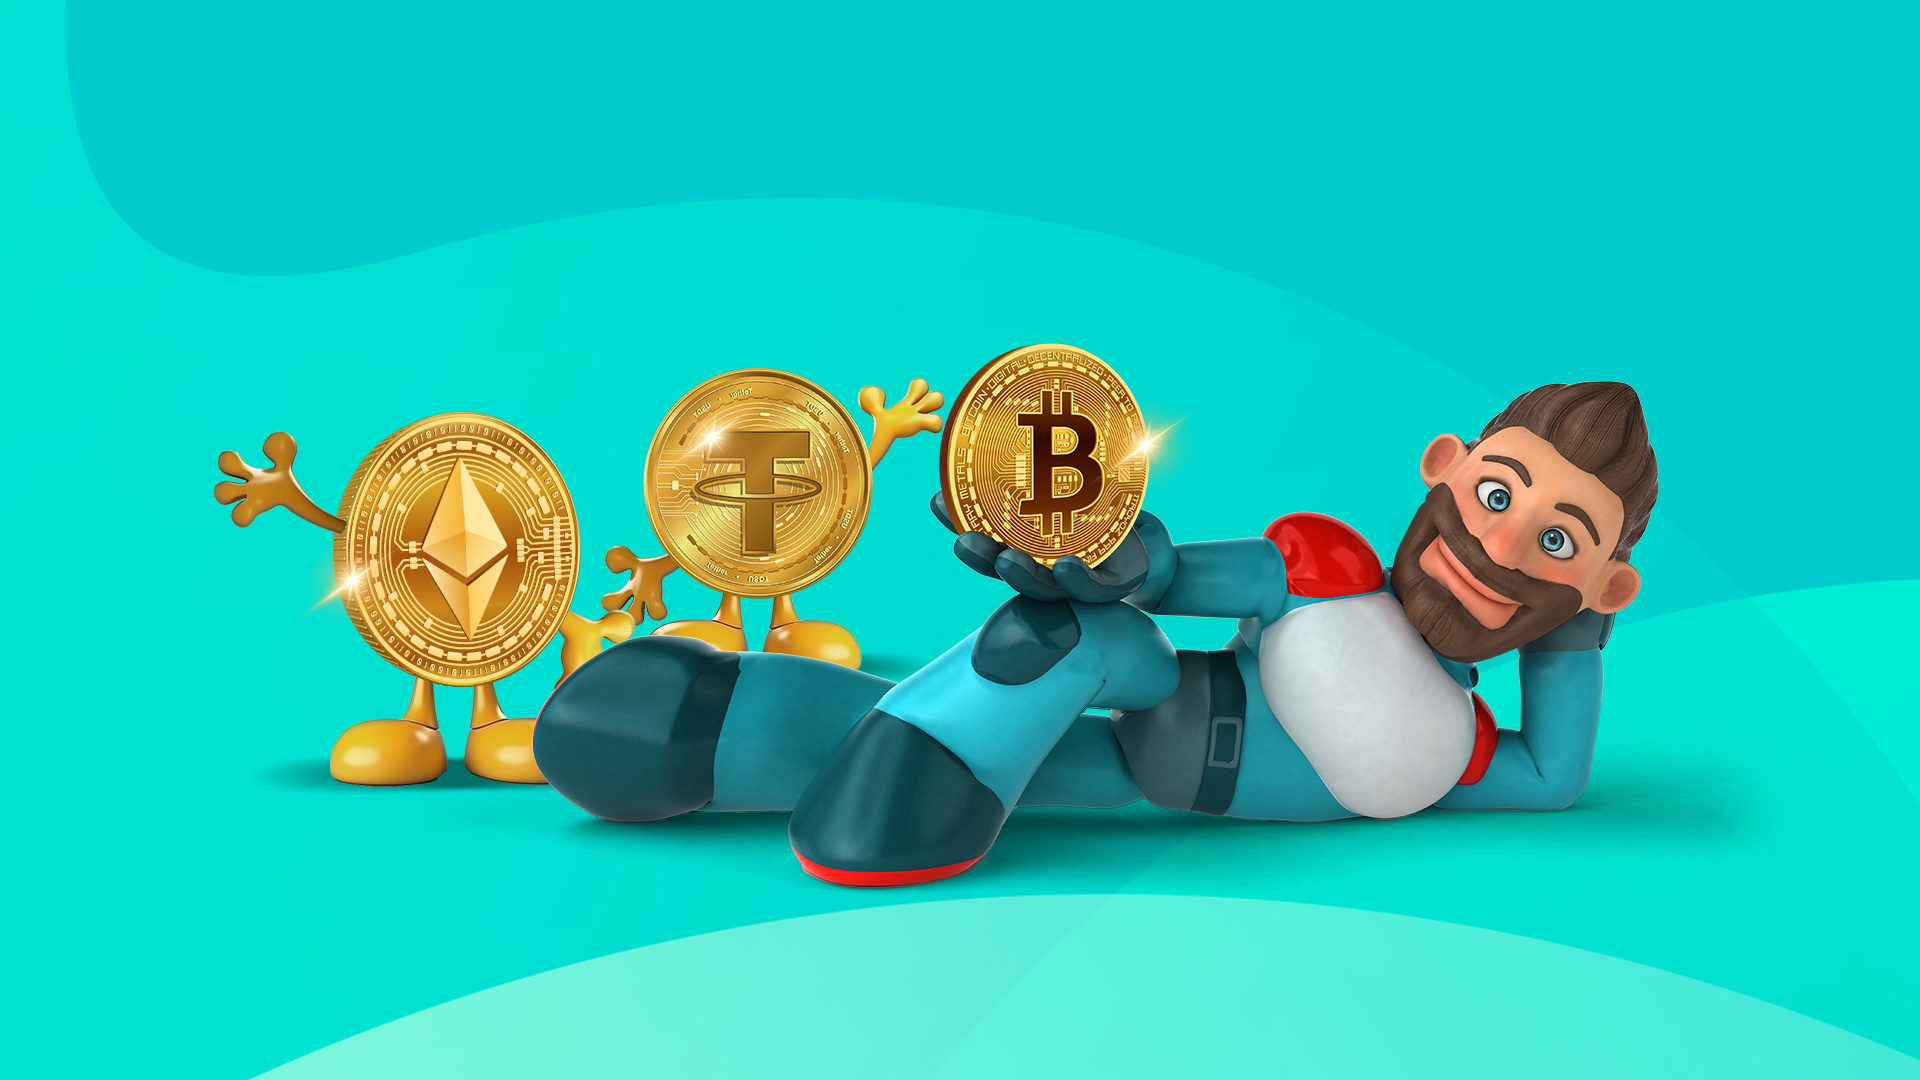 An animated male character wearing a robot suit is laying down holding a golden Bitcoin coin. Other tokens also feature on multi-tone blue background.